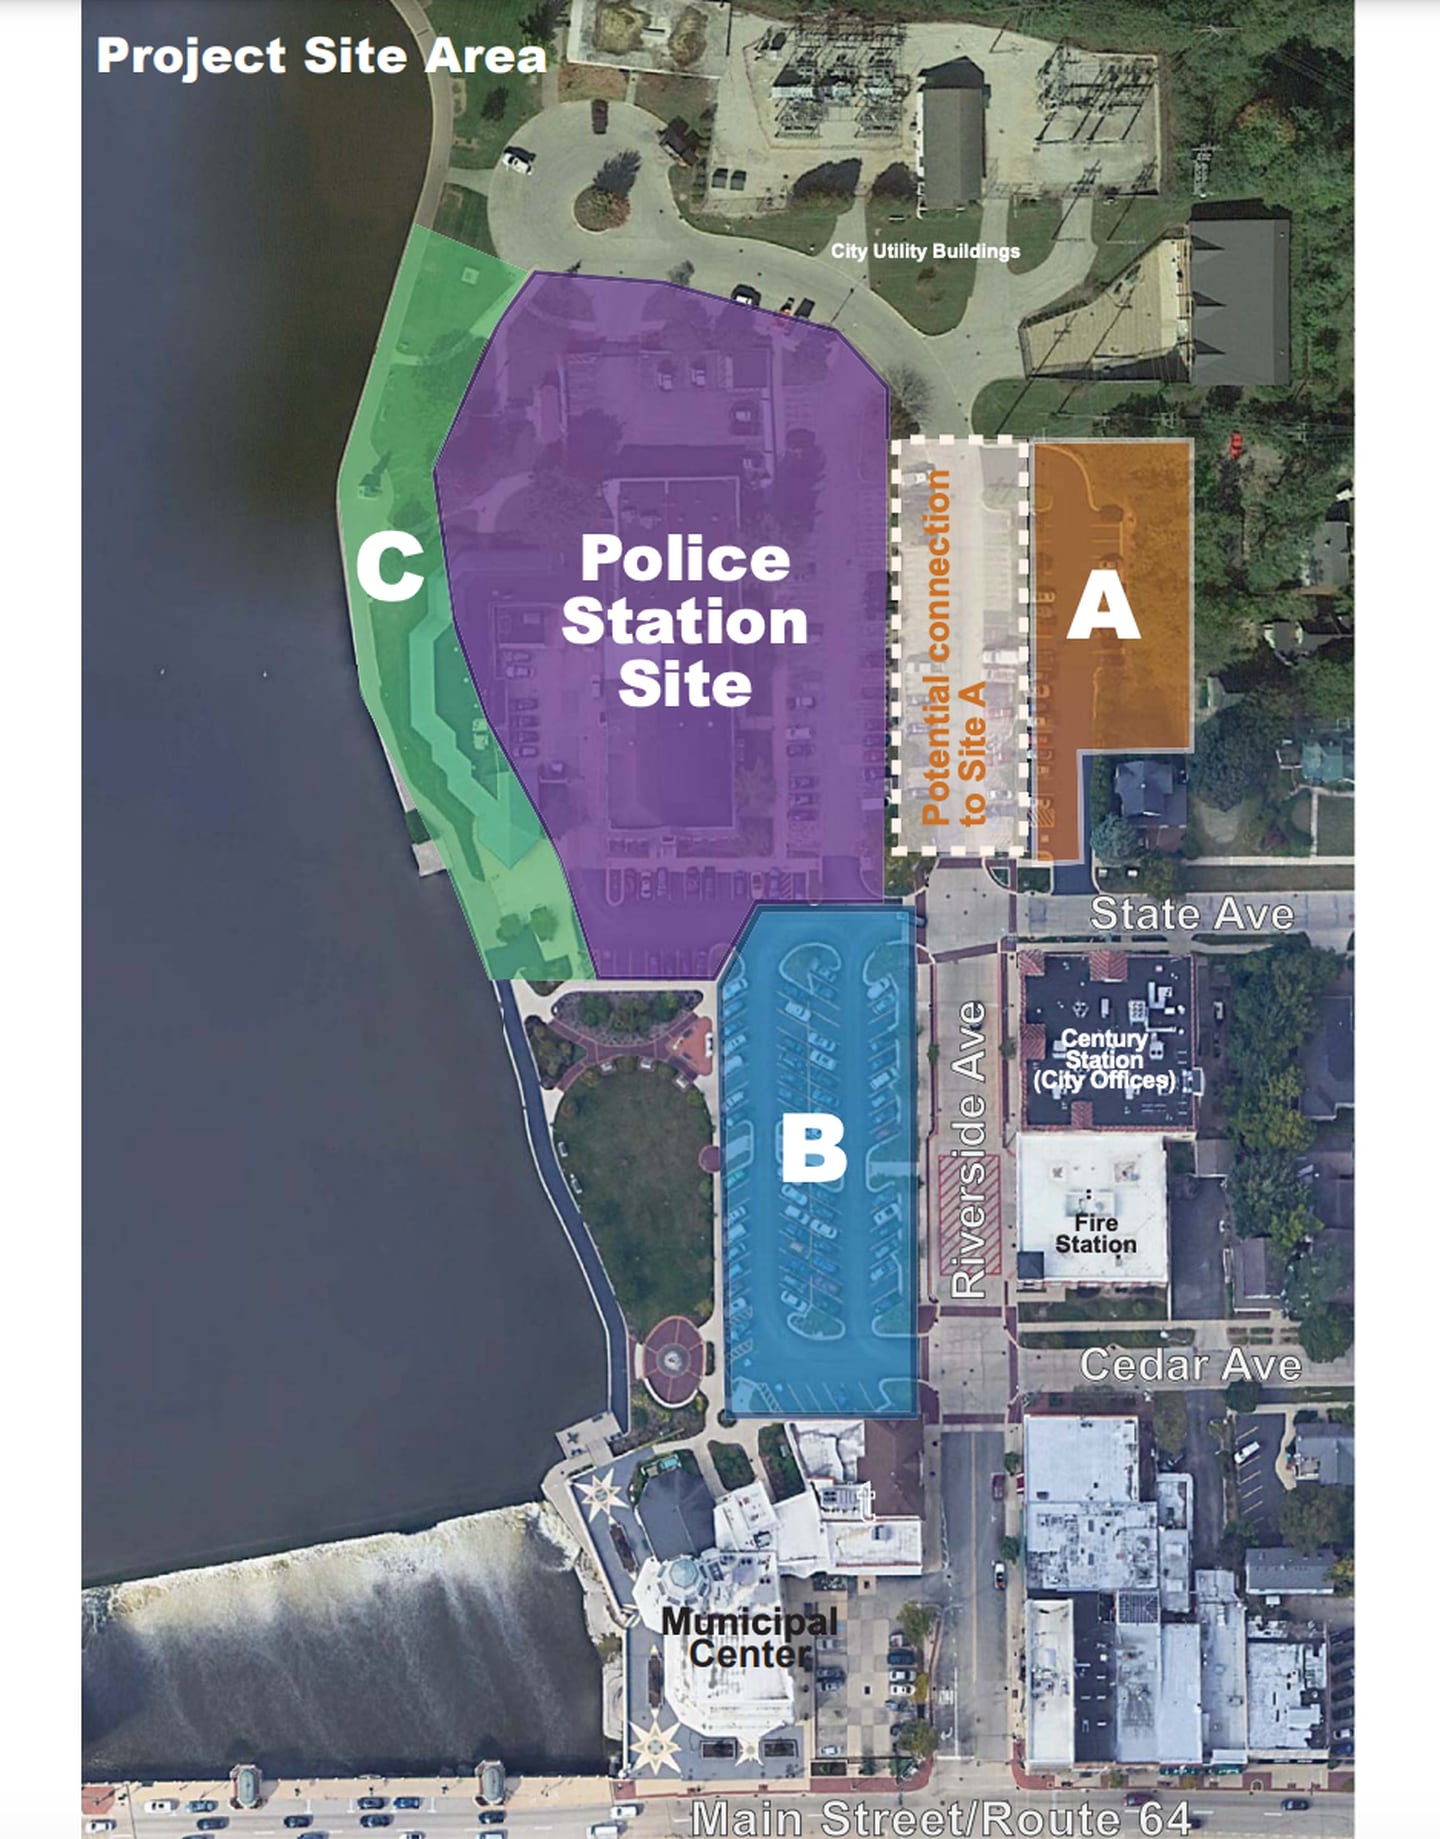 Site map for the Downtown Riverfront Property Feasibility Study to be conducted in St. Charles this summer.